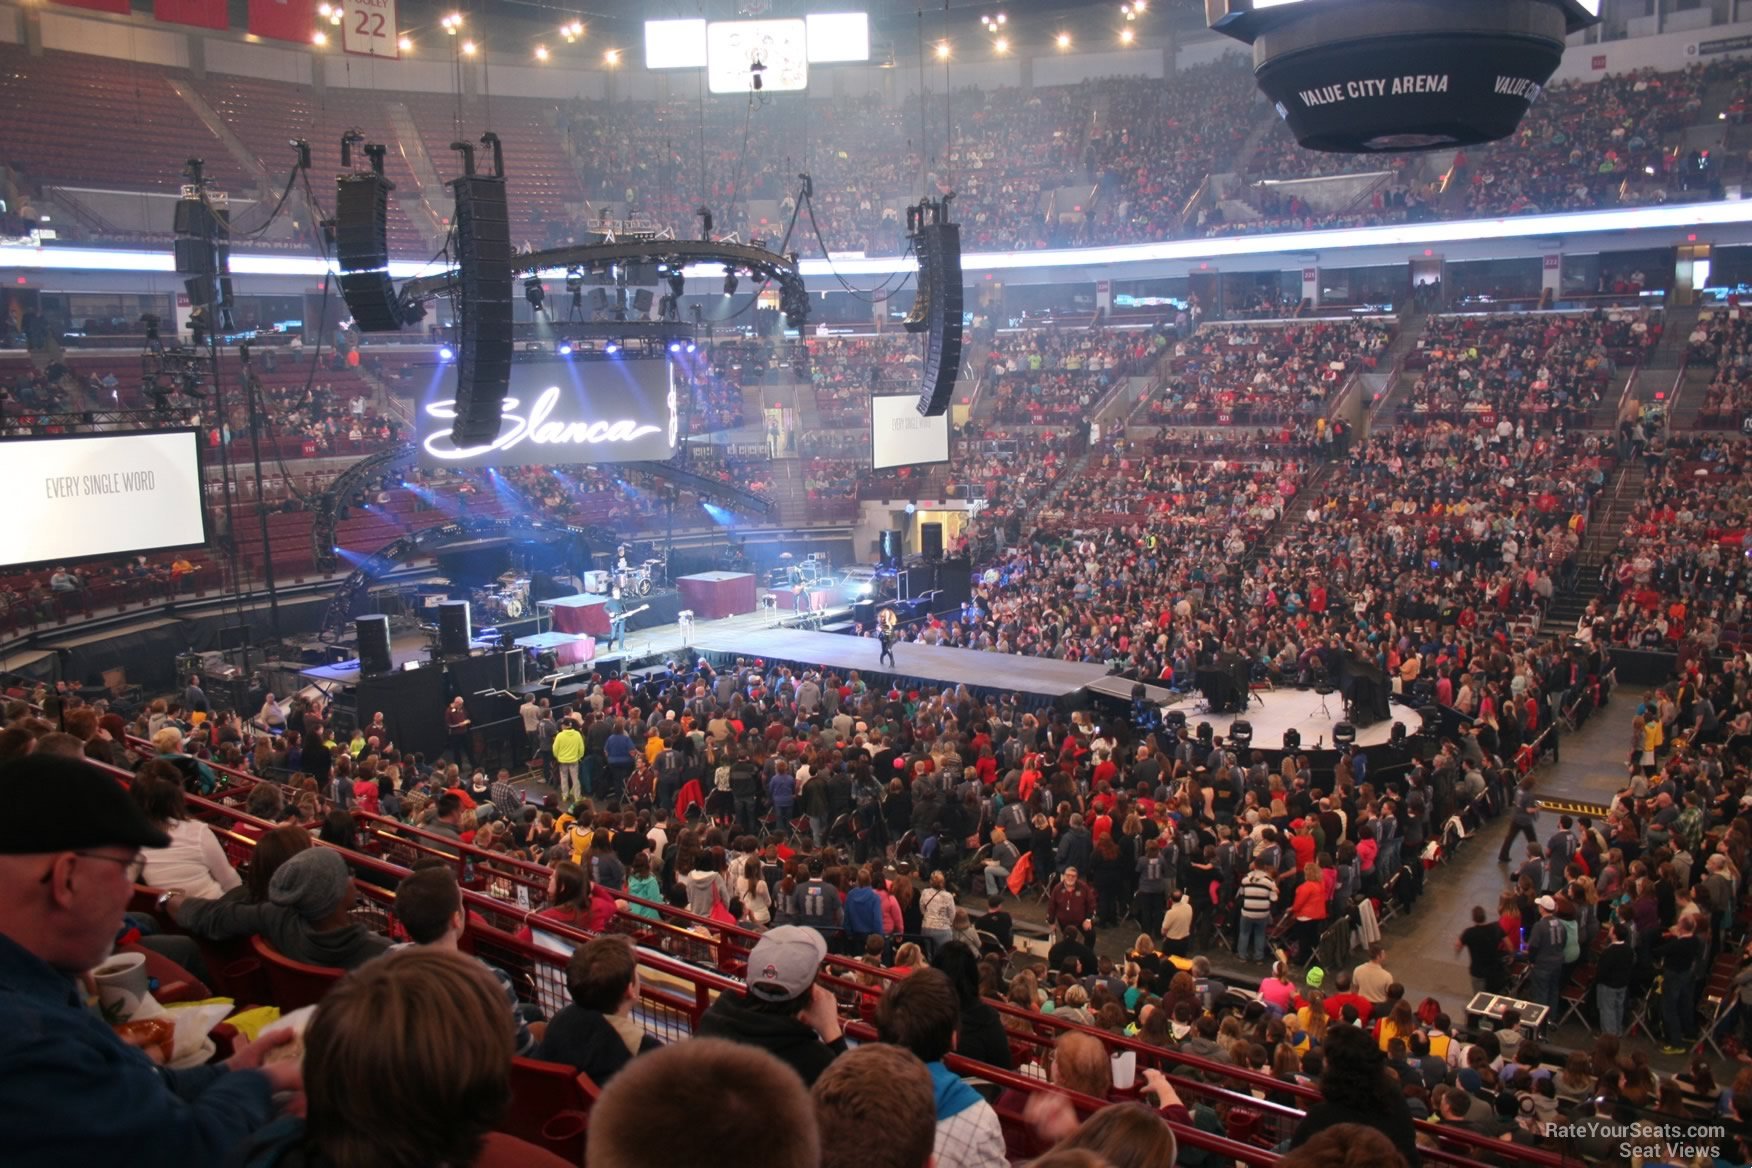 section 205, row d seat view  for concert - schottenstein center